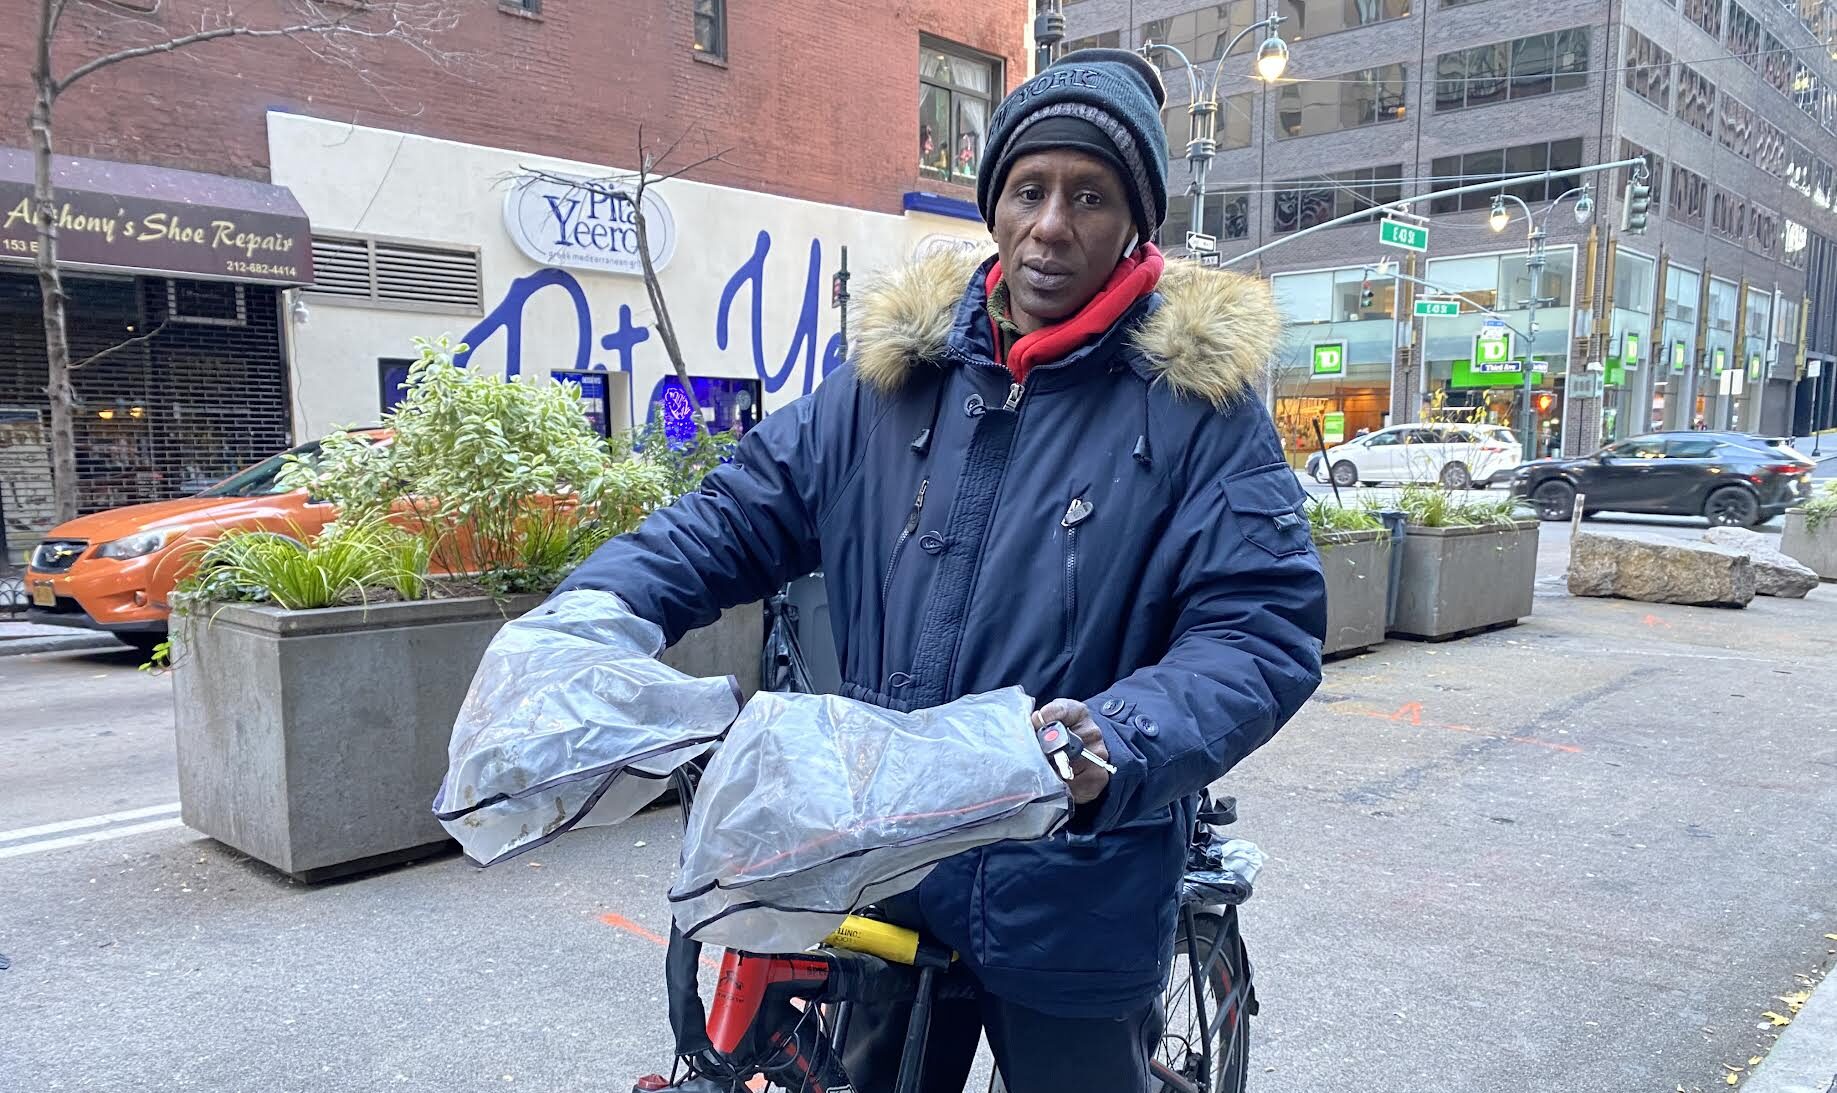 Salifou Diallo has lost six bicycles since he started working as an app food delivery worker. (Credit: Maurice Oniang'o)